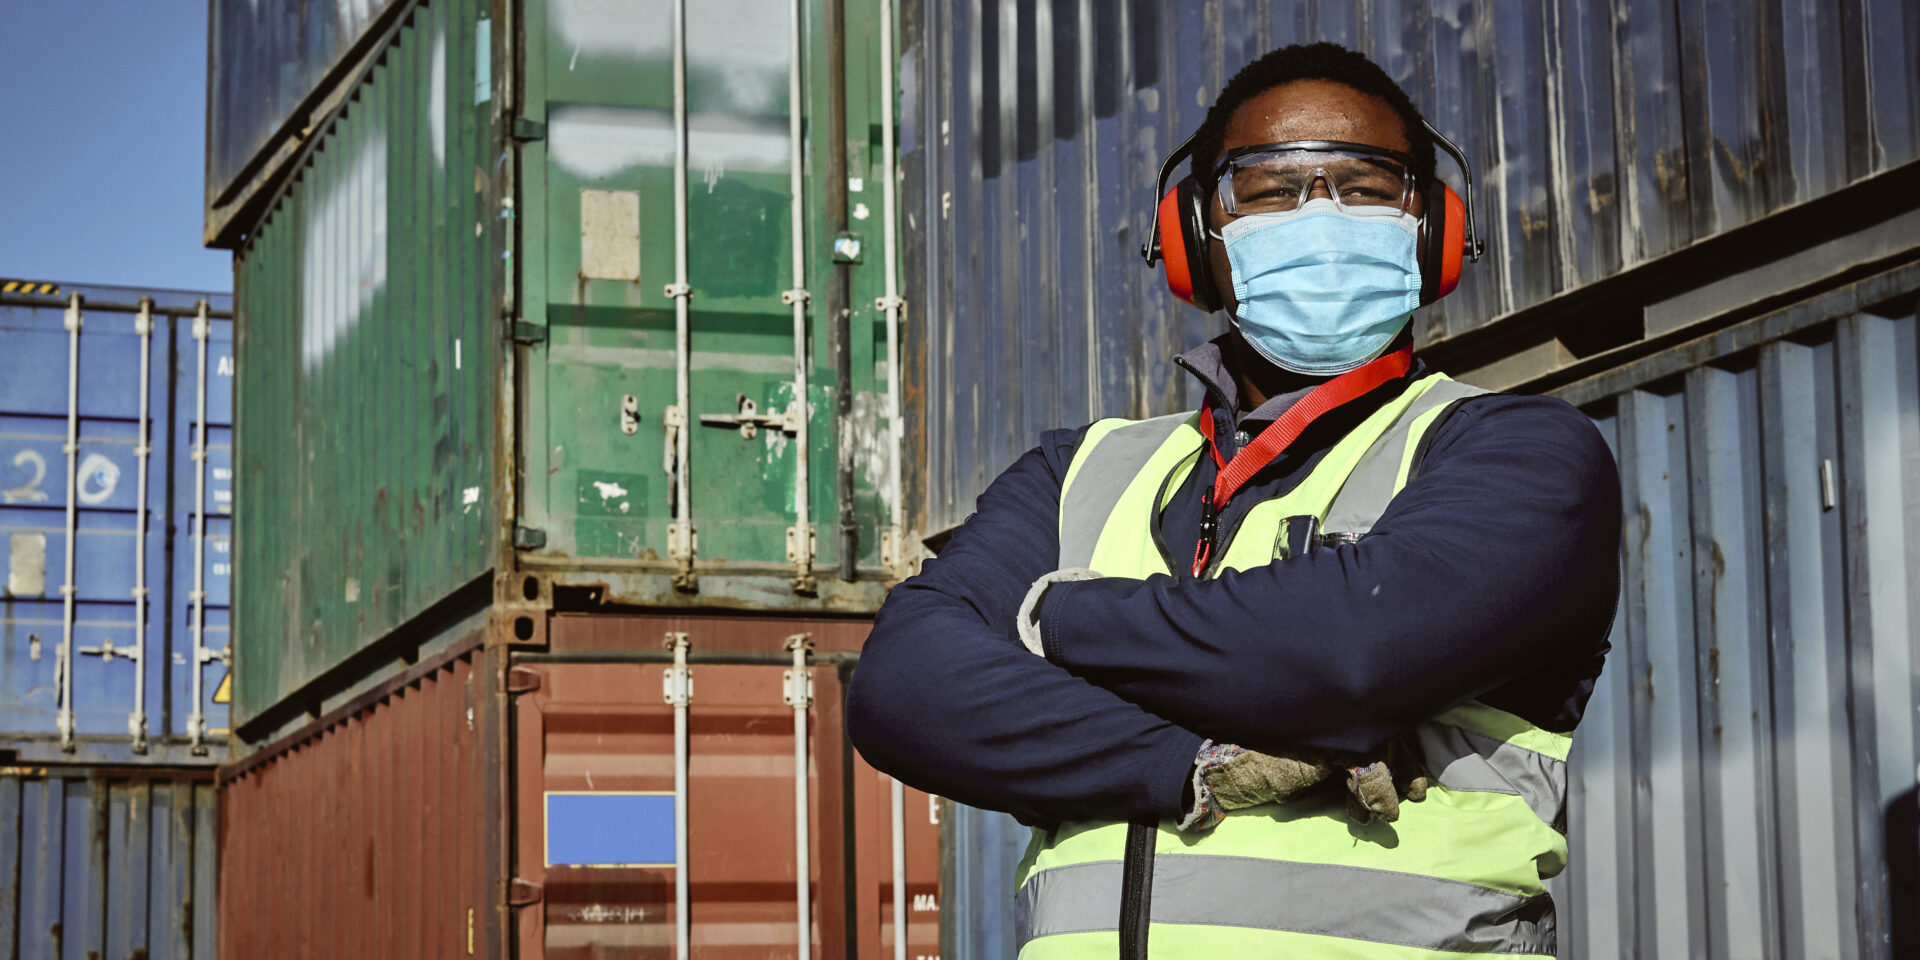 A man assessing and accounting for shipping containers in a storage yard in Johannesburg South Africa. He is wearing a reflective vest and a face mask.